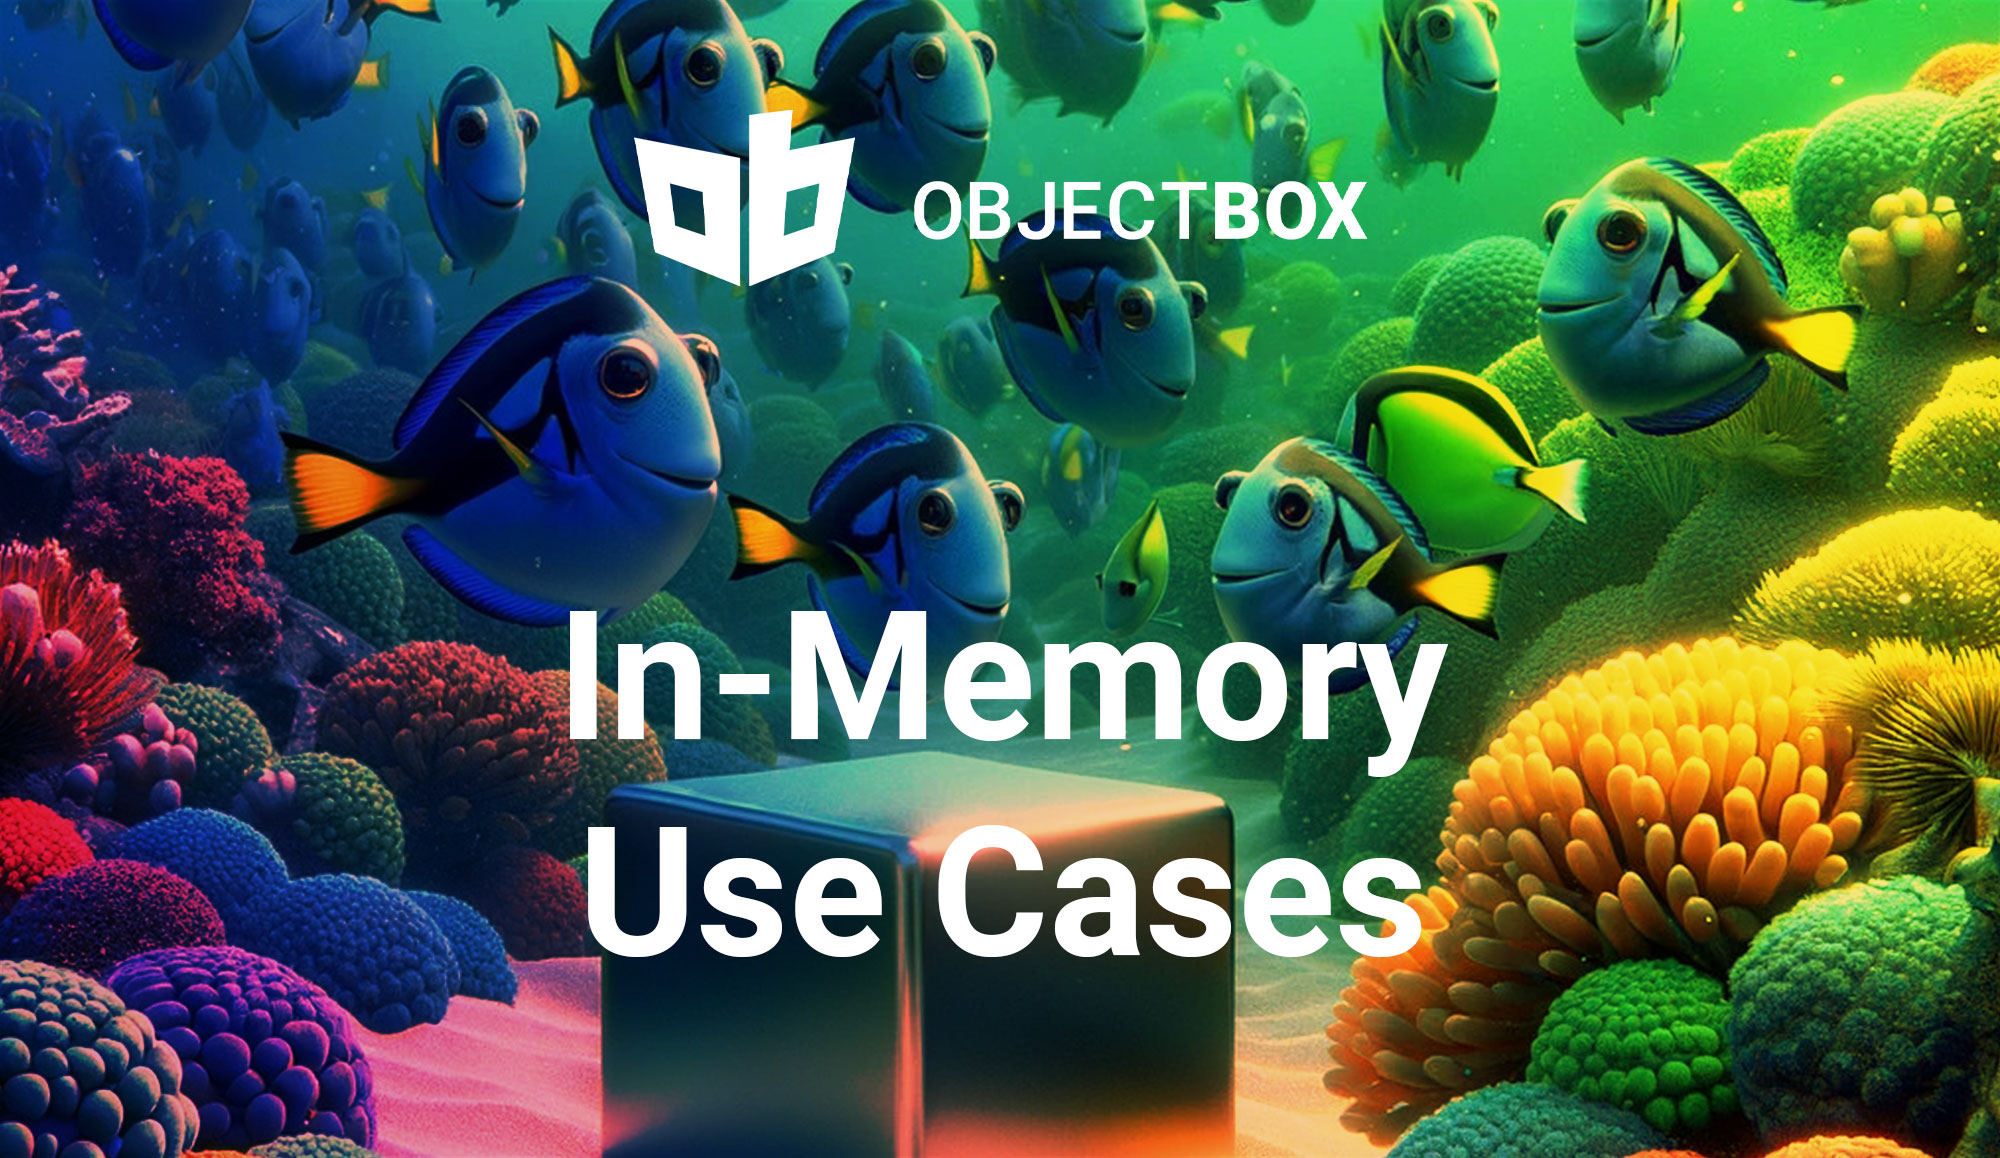 In-memory use cases